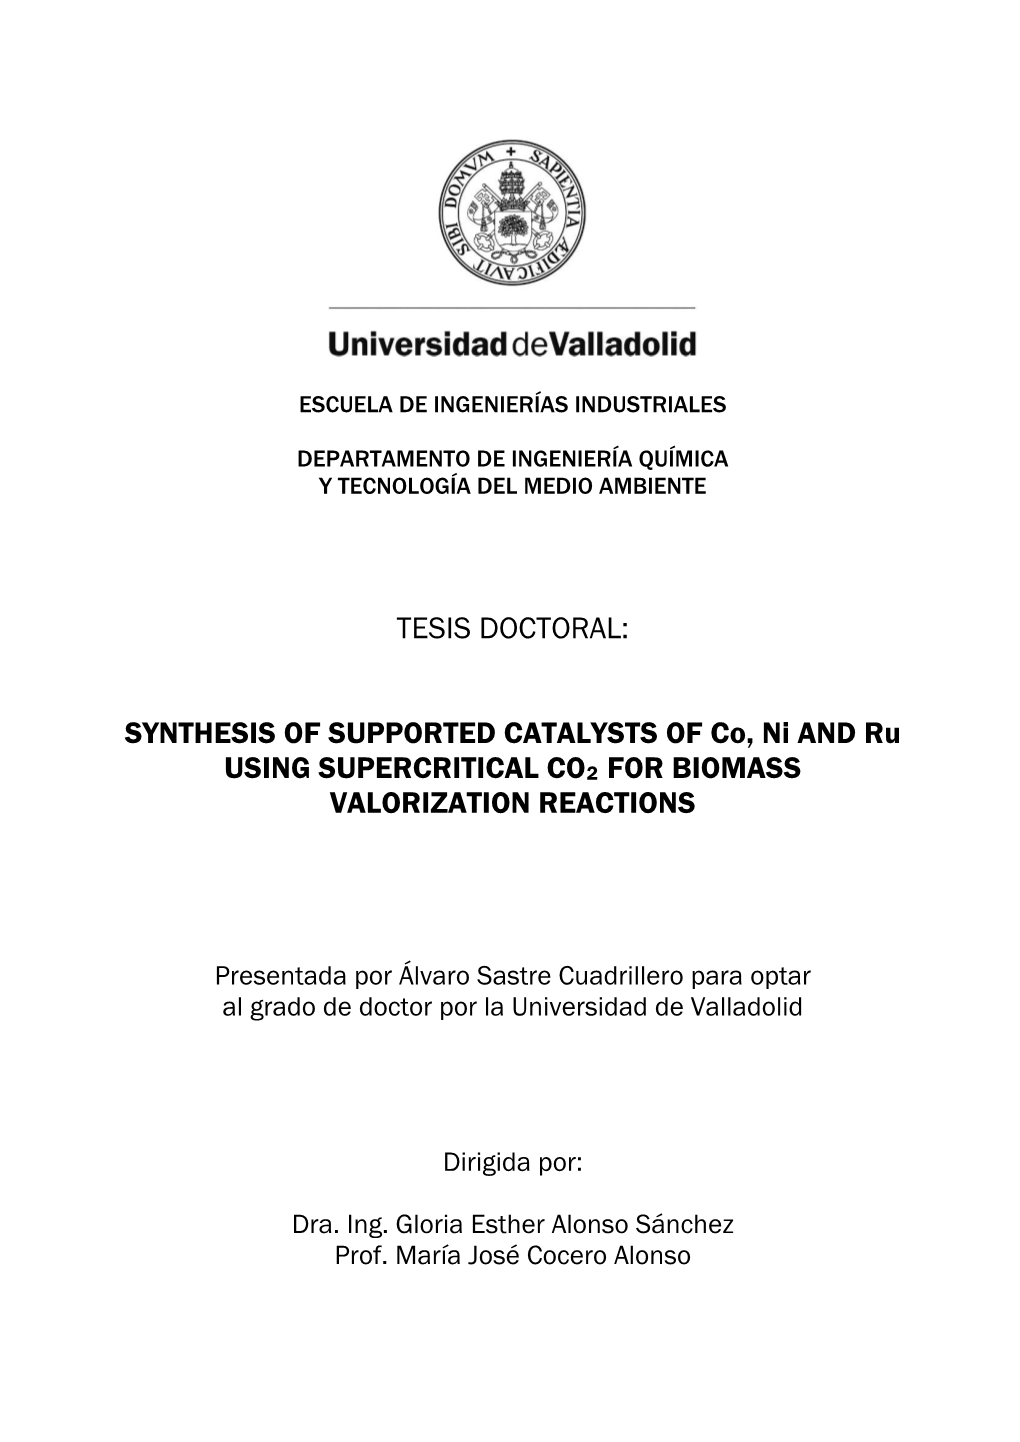 Tesis Doctoral: Synthesis of Supported